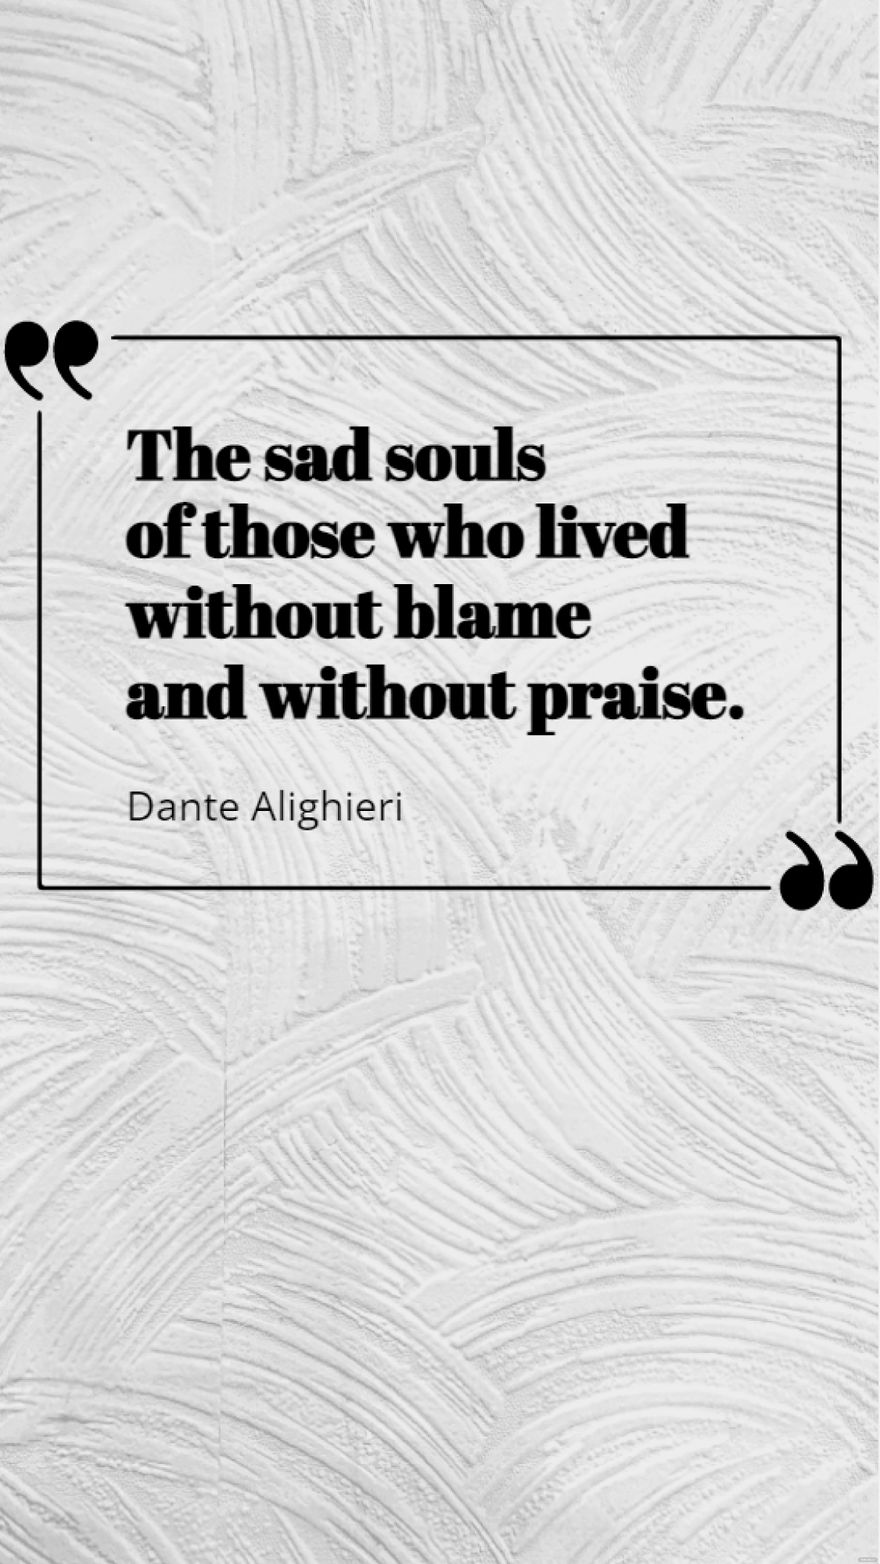 Dante Alighieri - The sad souls of those who lived without blame and without praise.